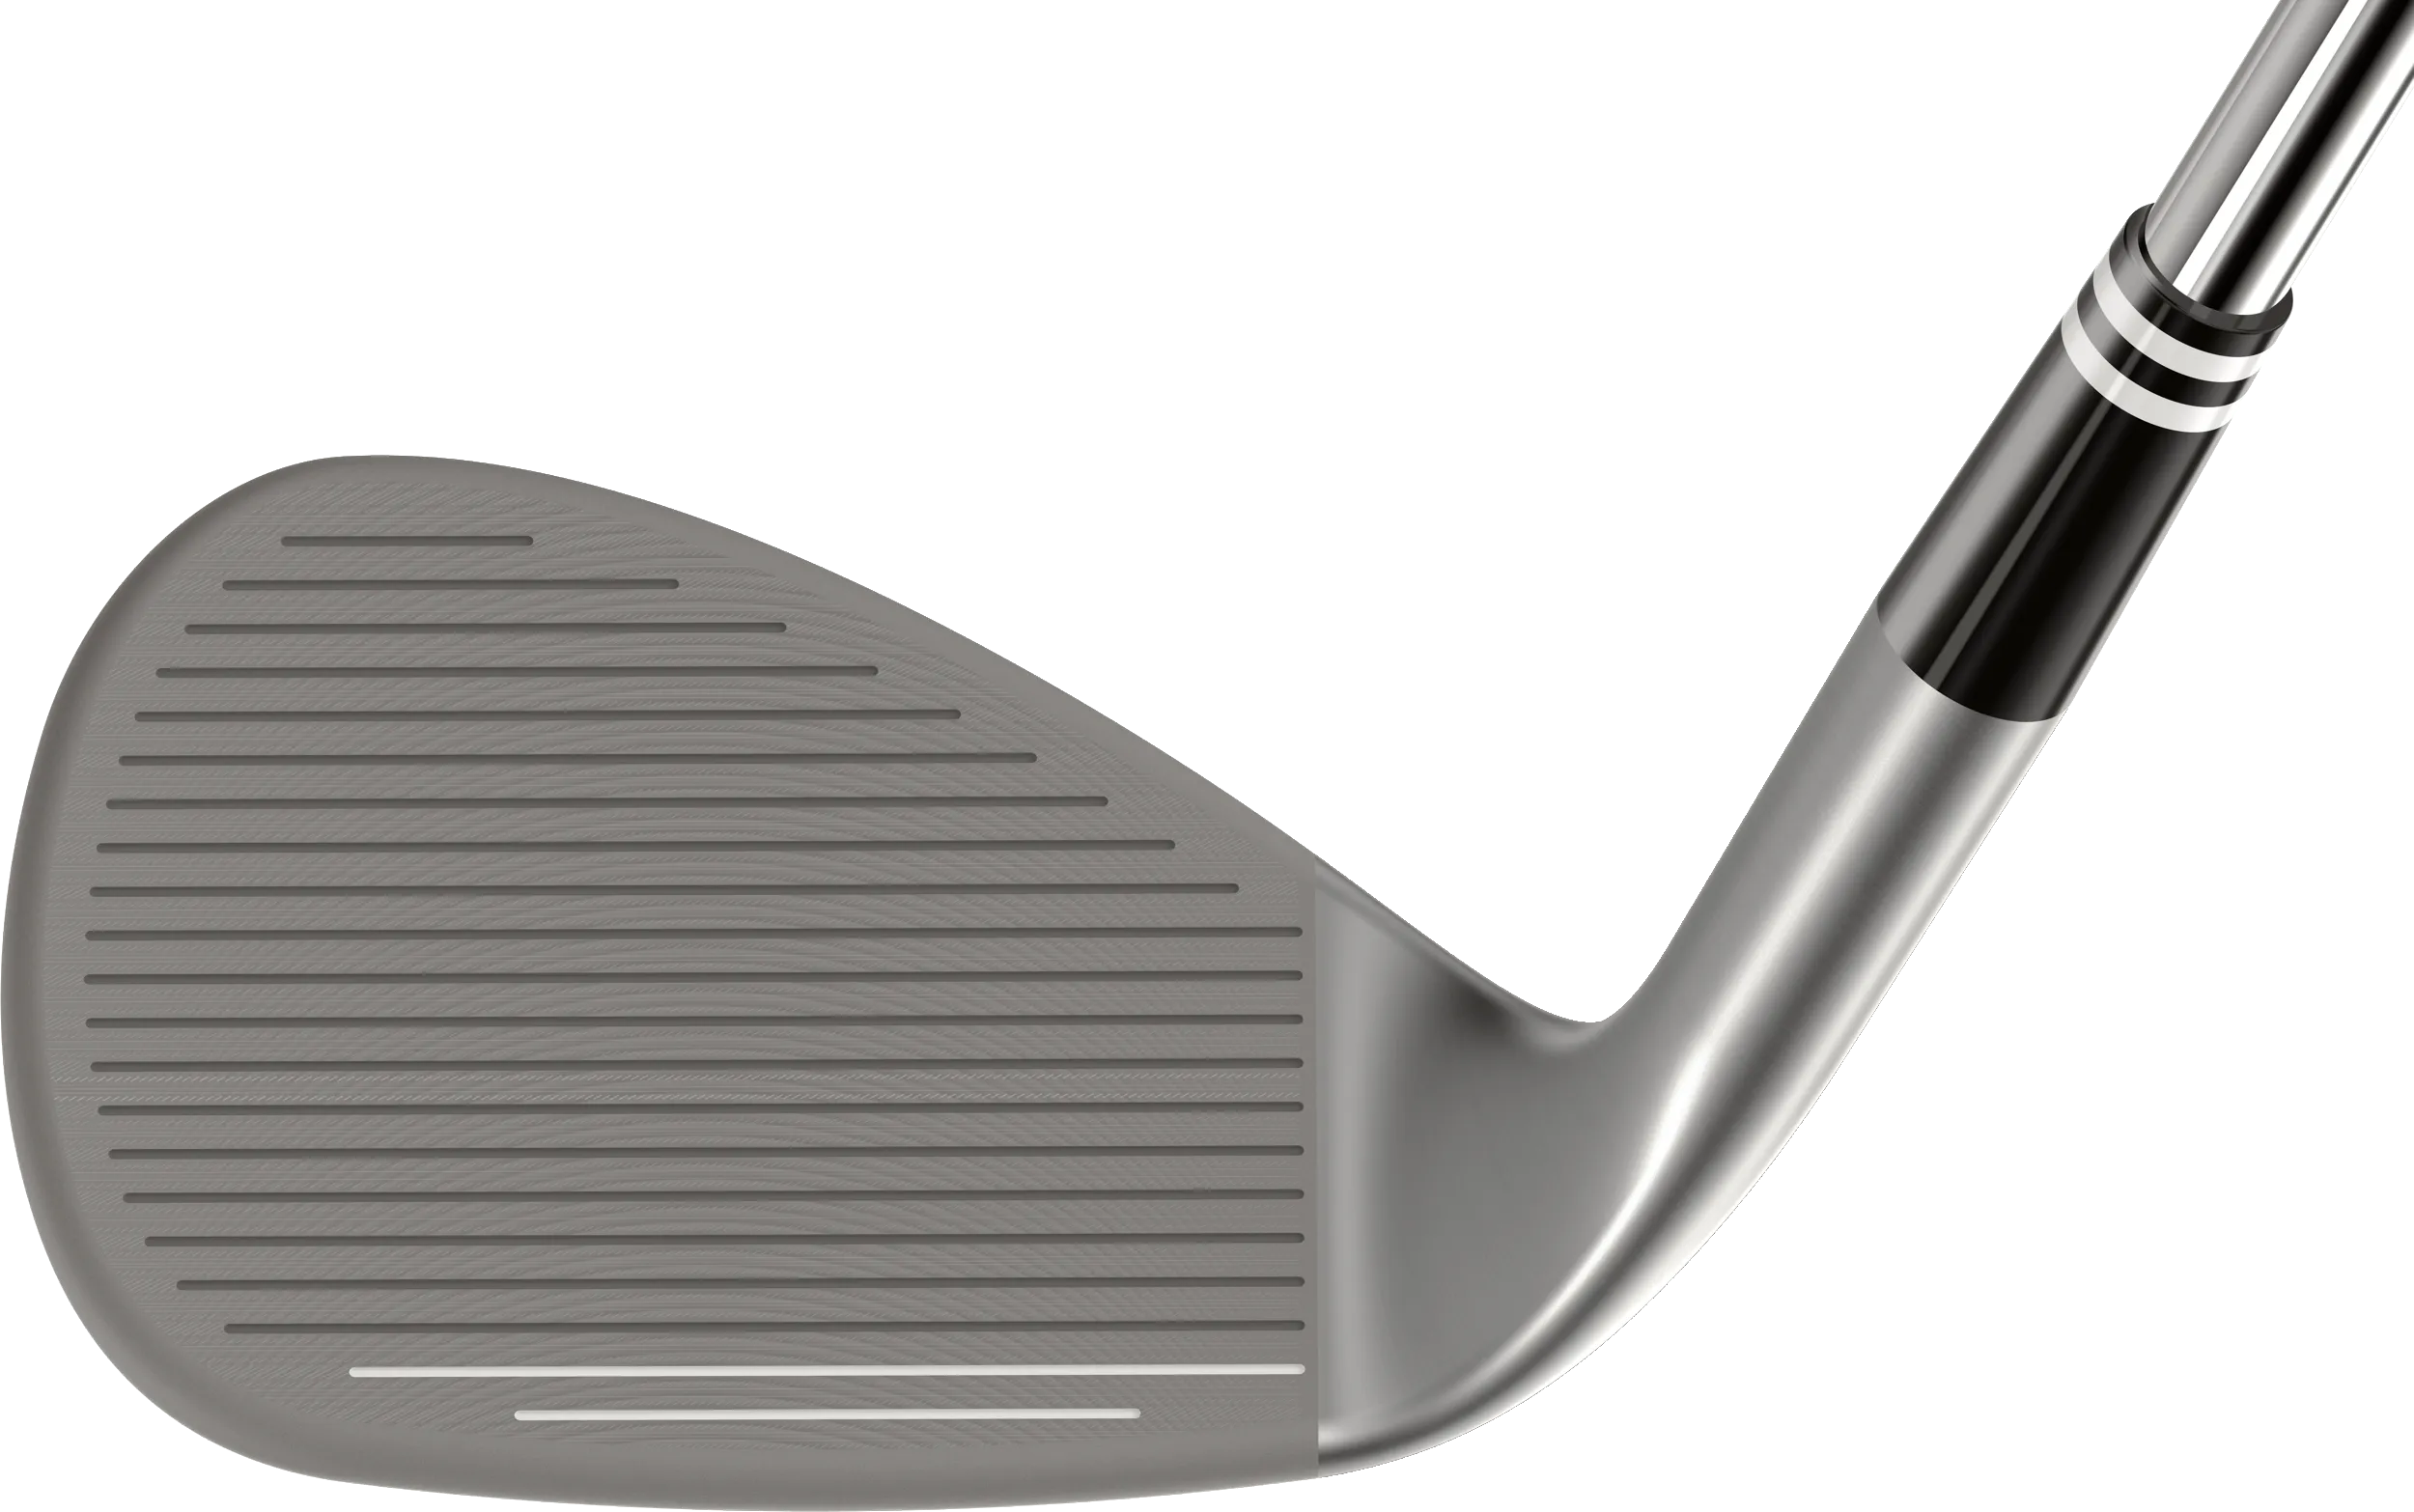 Cleveland Smart Sole Full-Face Chrome Wedge